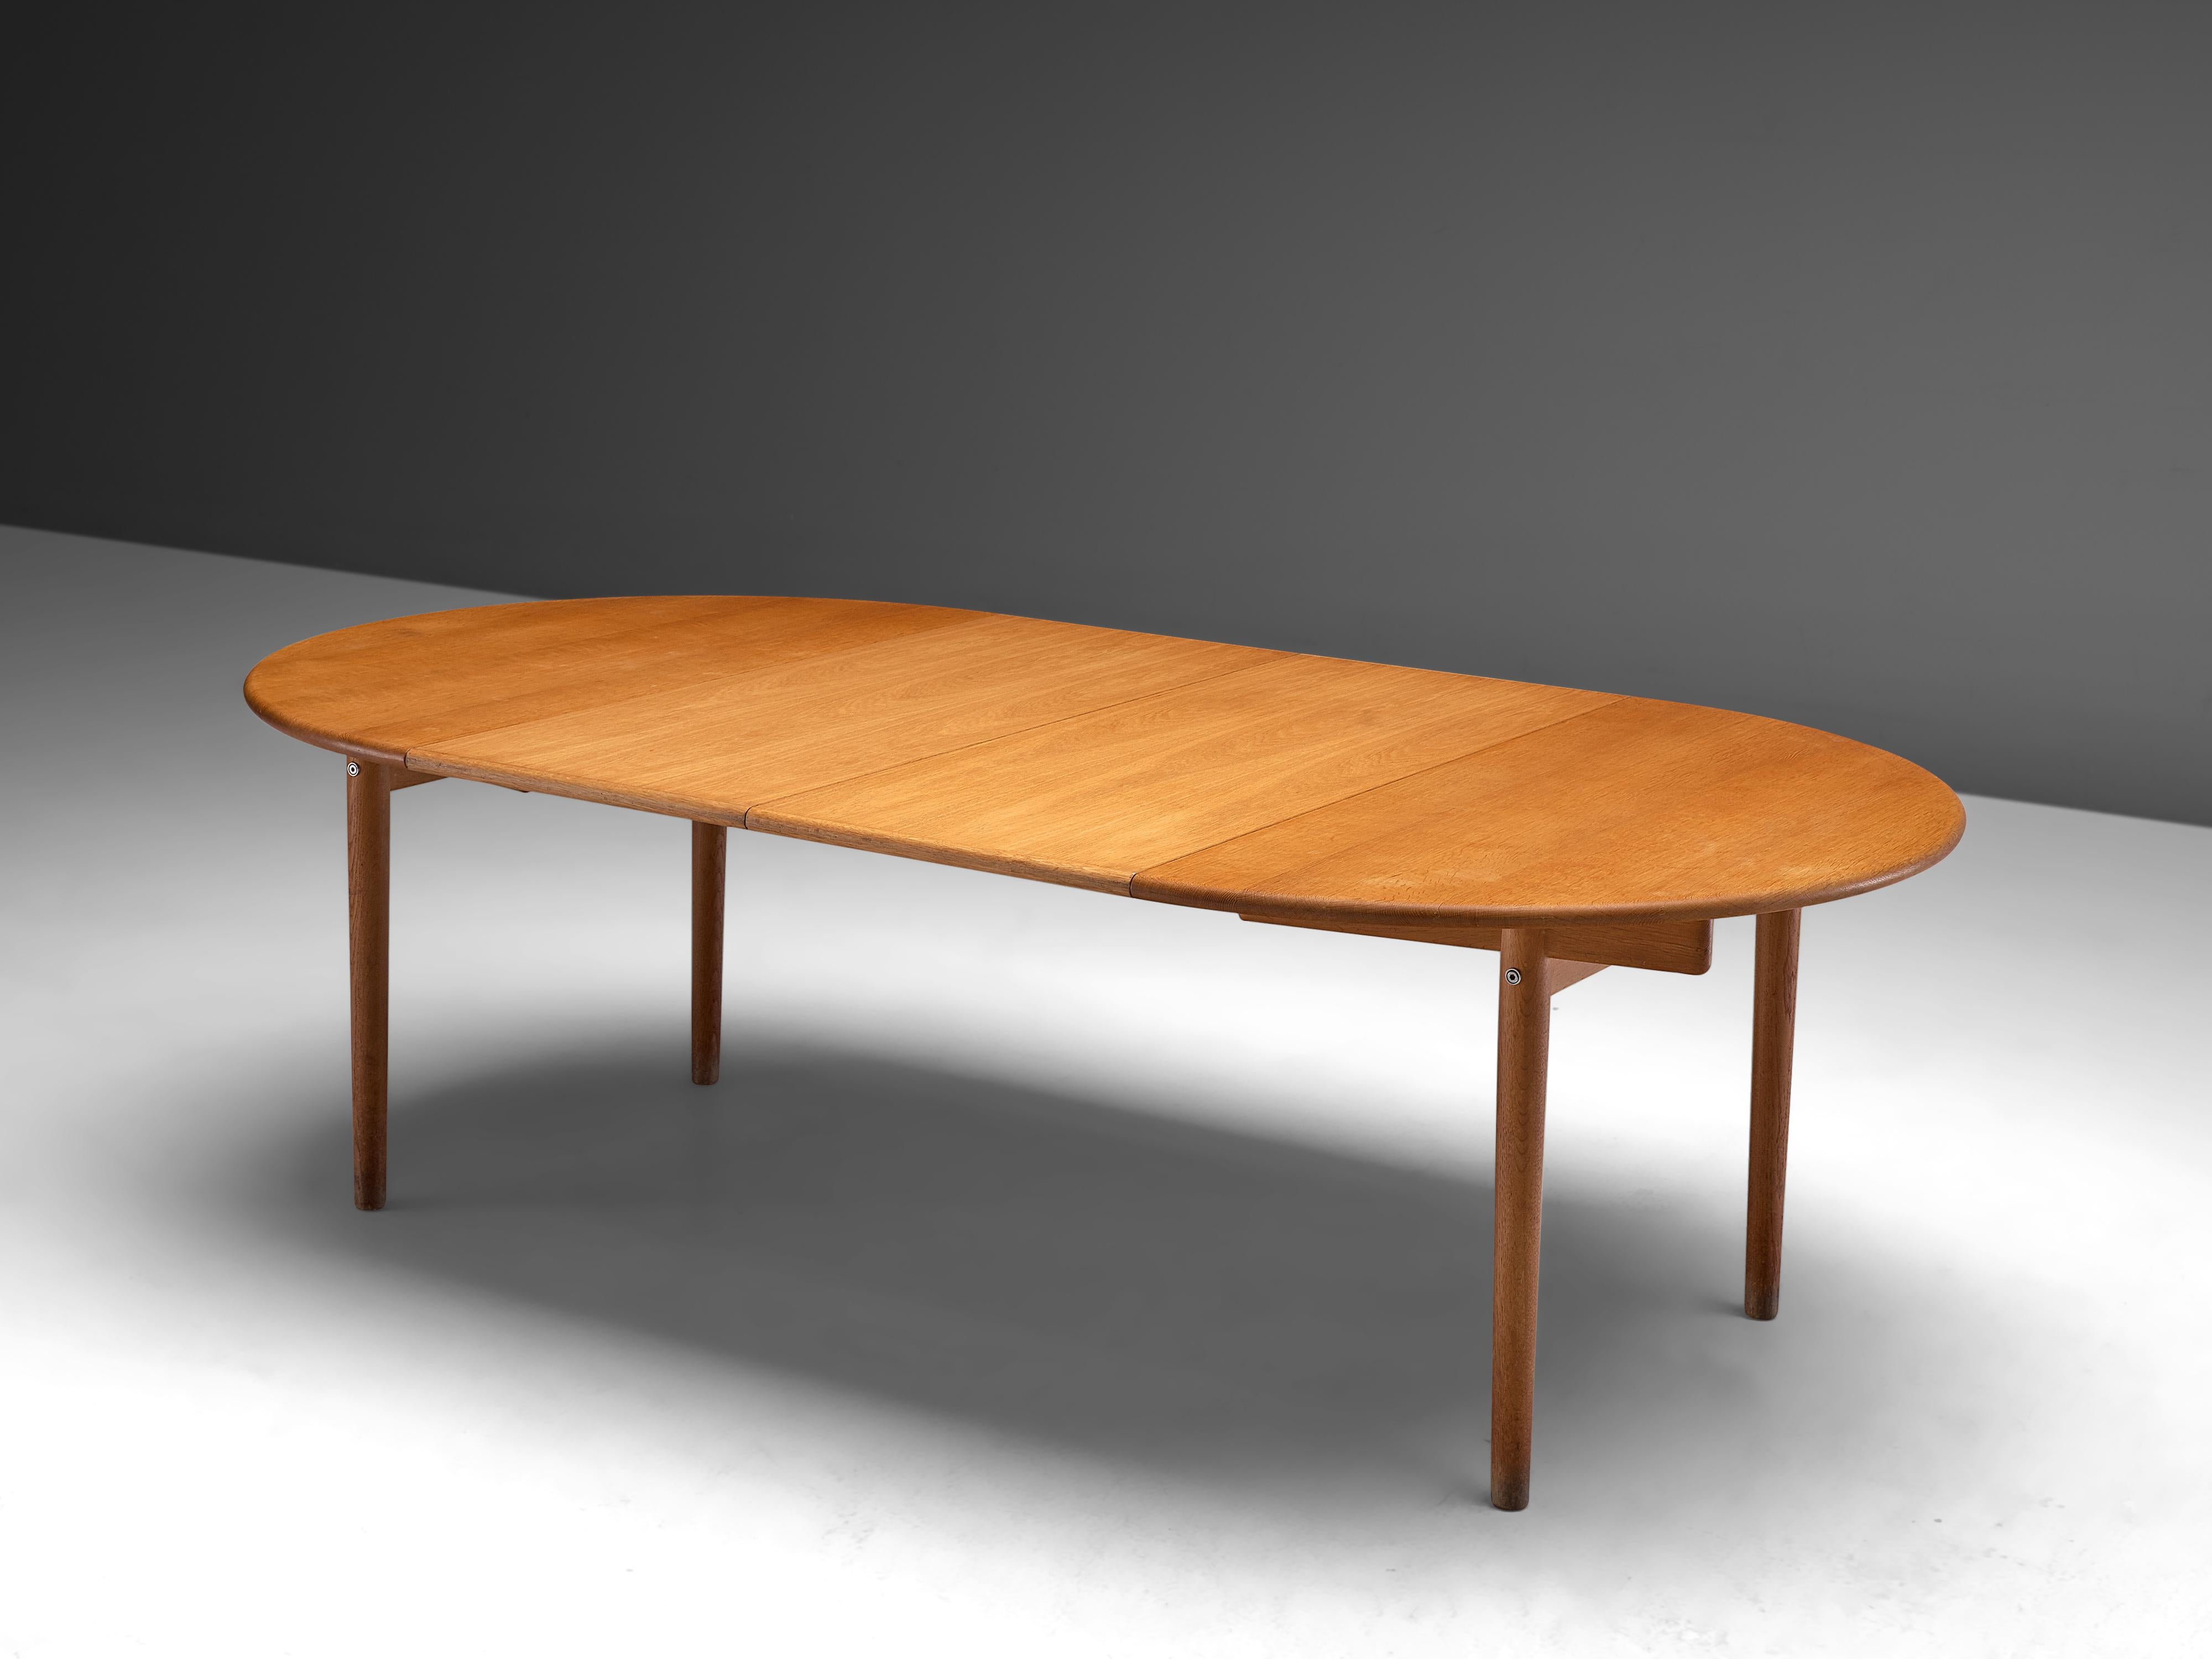 Hans J. Wegner for PP Møbler, extendable dining table ‘PP70’, oak, Denmark, 1975

This extendable dining table designed by Hans J. Wegner is executed in oak. The round tabletop has two additional leaves in order to expand the table from 126 cm to